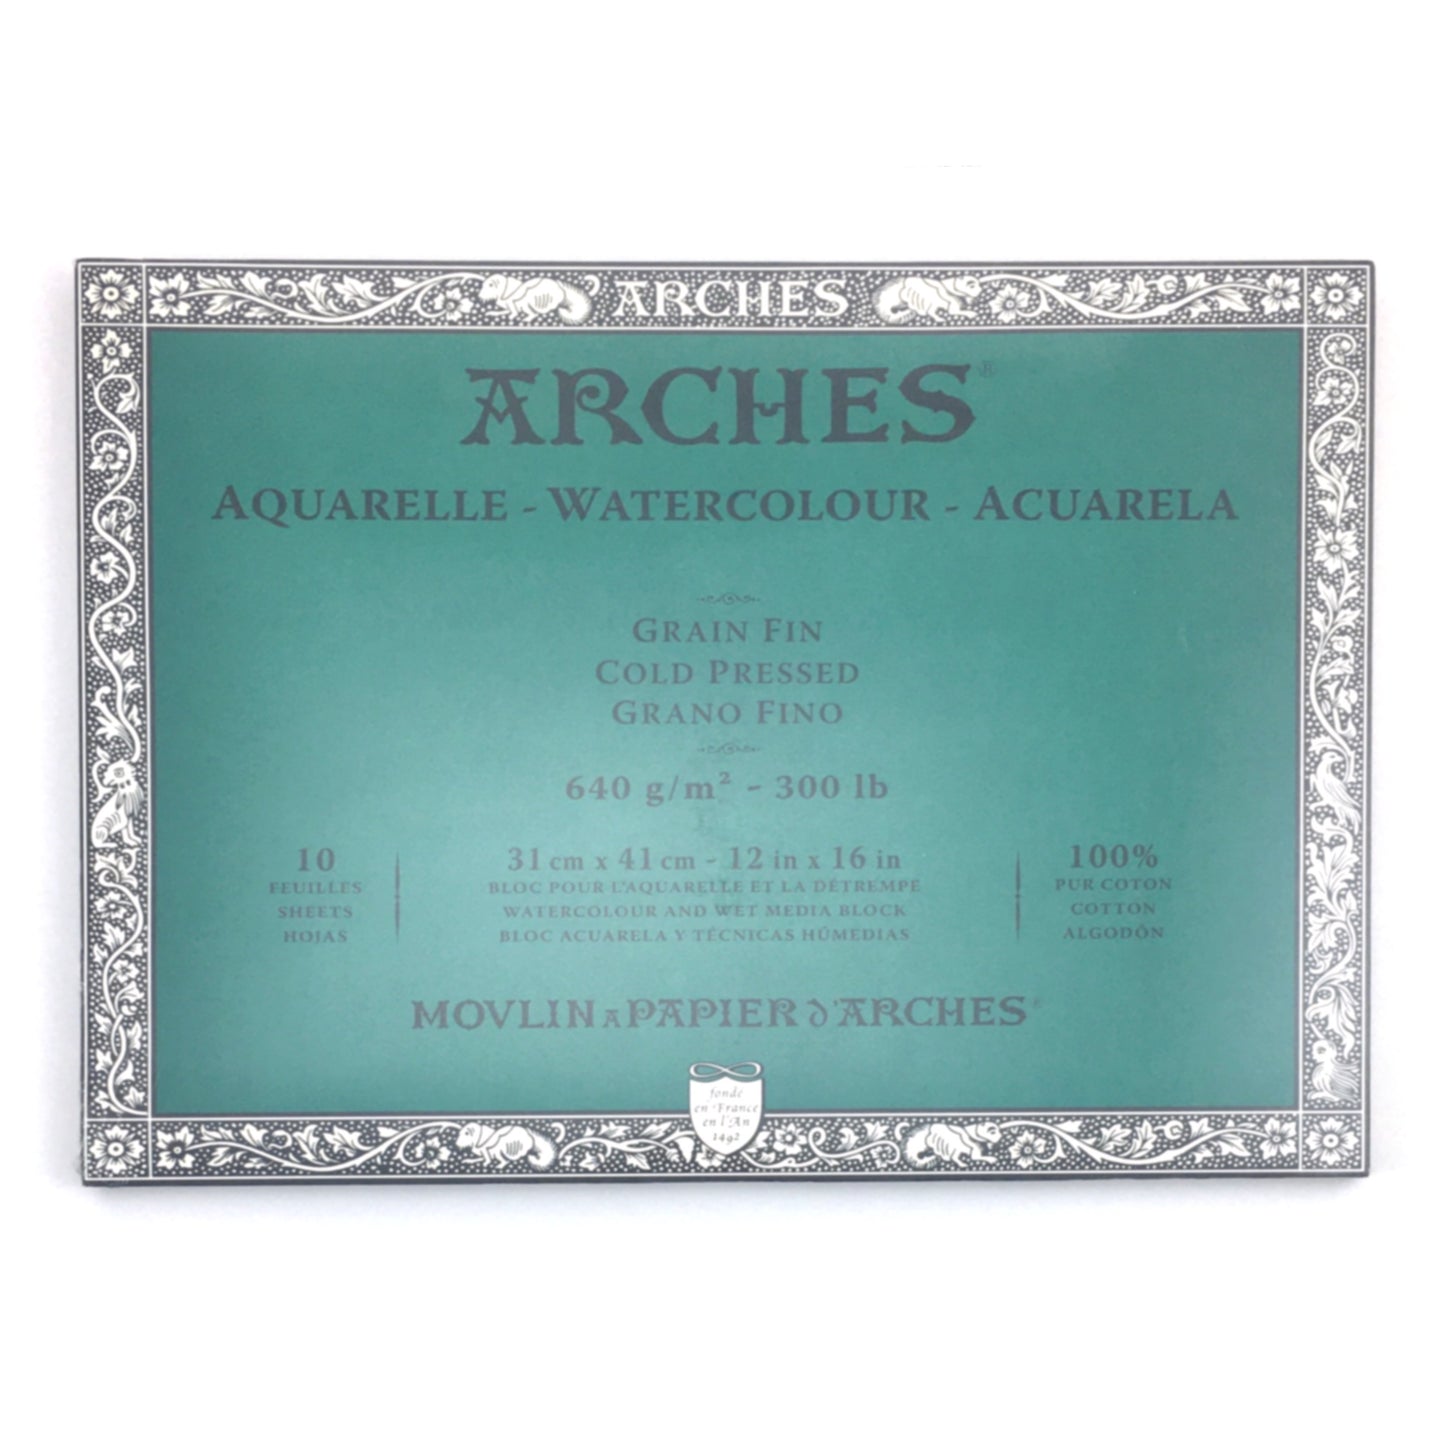 Arches Aquarelle Watercolor Block - Cold Press - 640 gsm - 10 sheets - 12 x 16 inches by Arches - K. A. Artist Shop